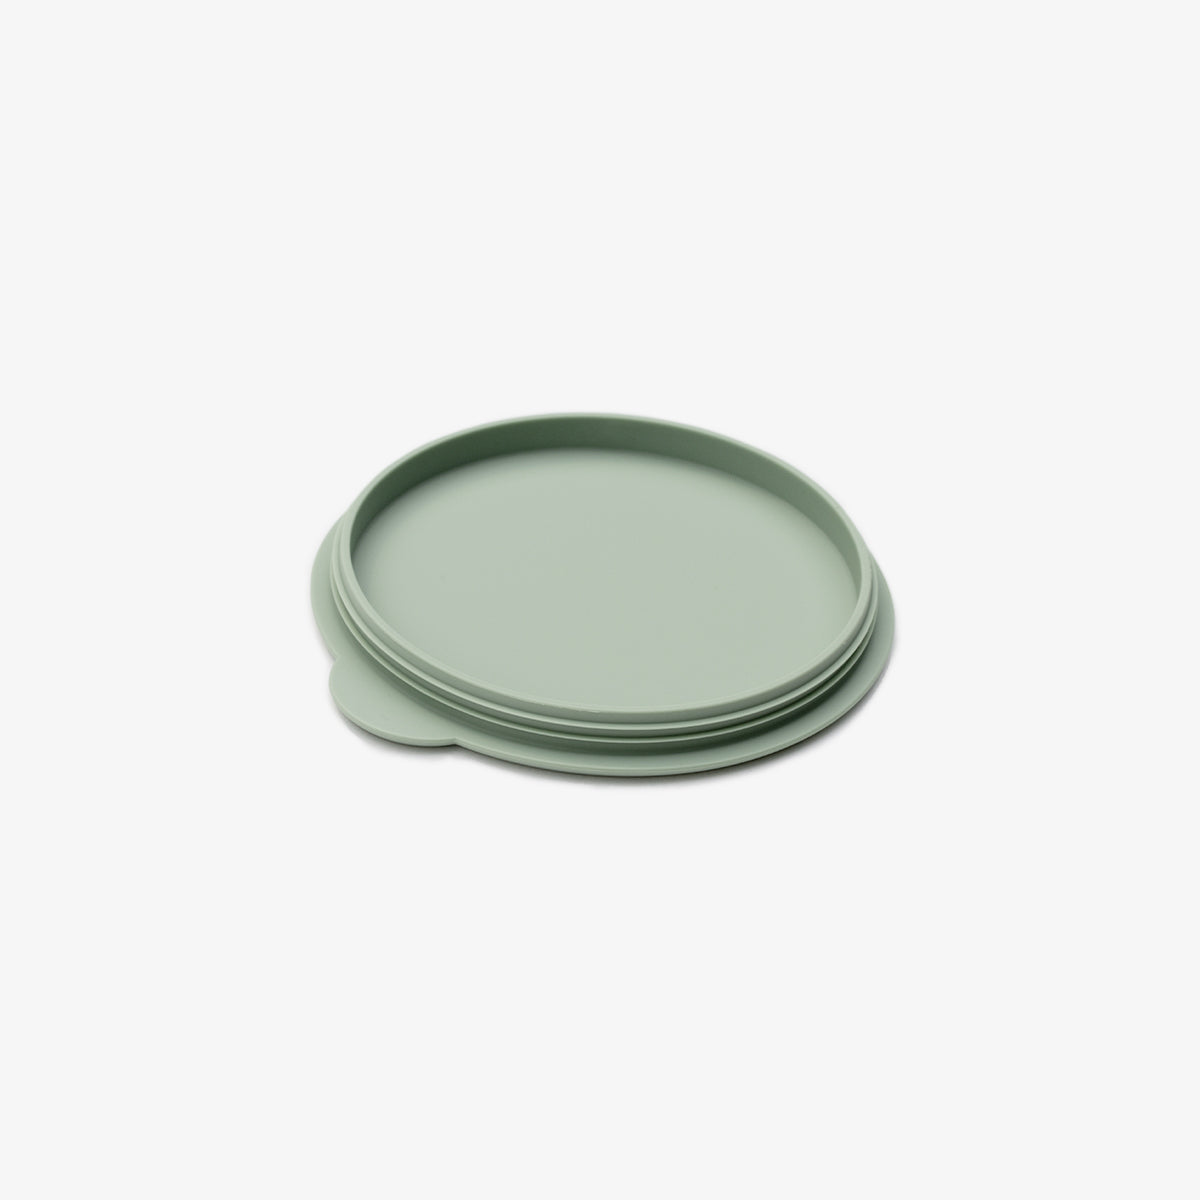 Mini Bowl Lid in Sage by ezpz / The Original All-In-One Silicone Plates & Placemats that Stick to the Table